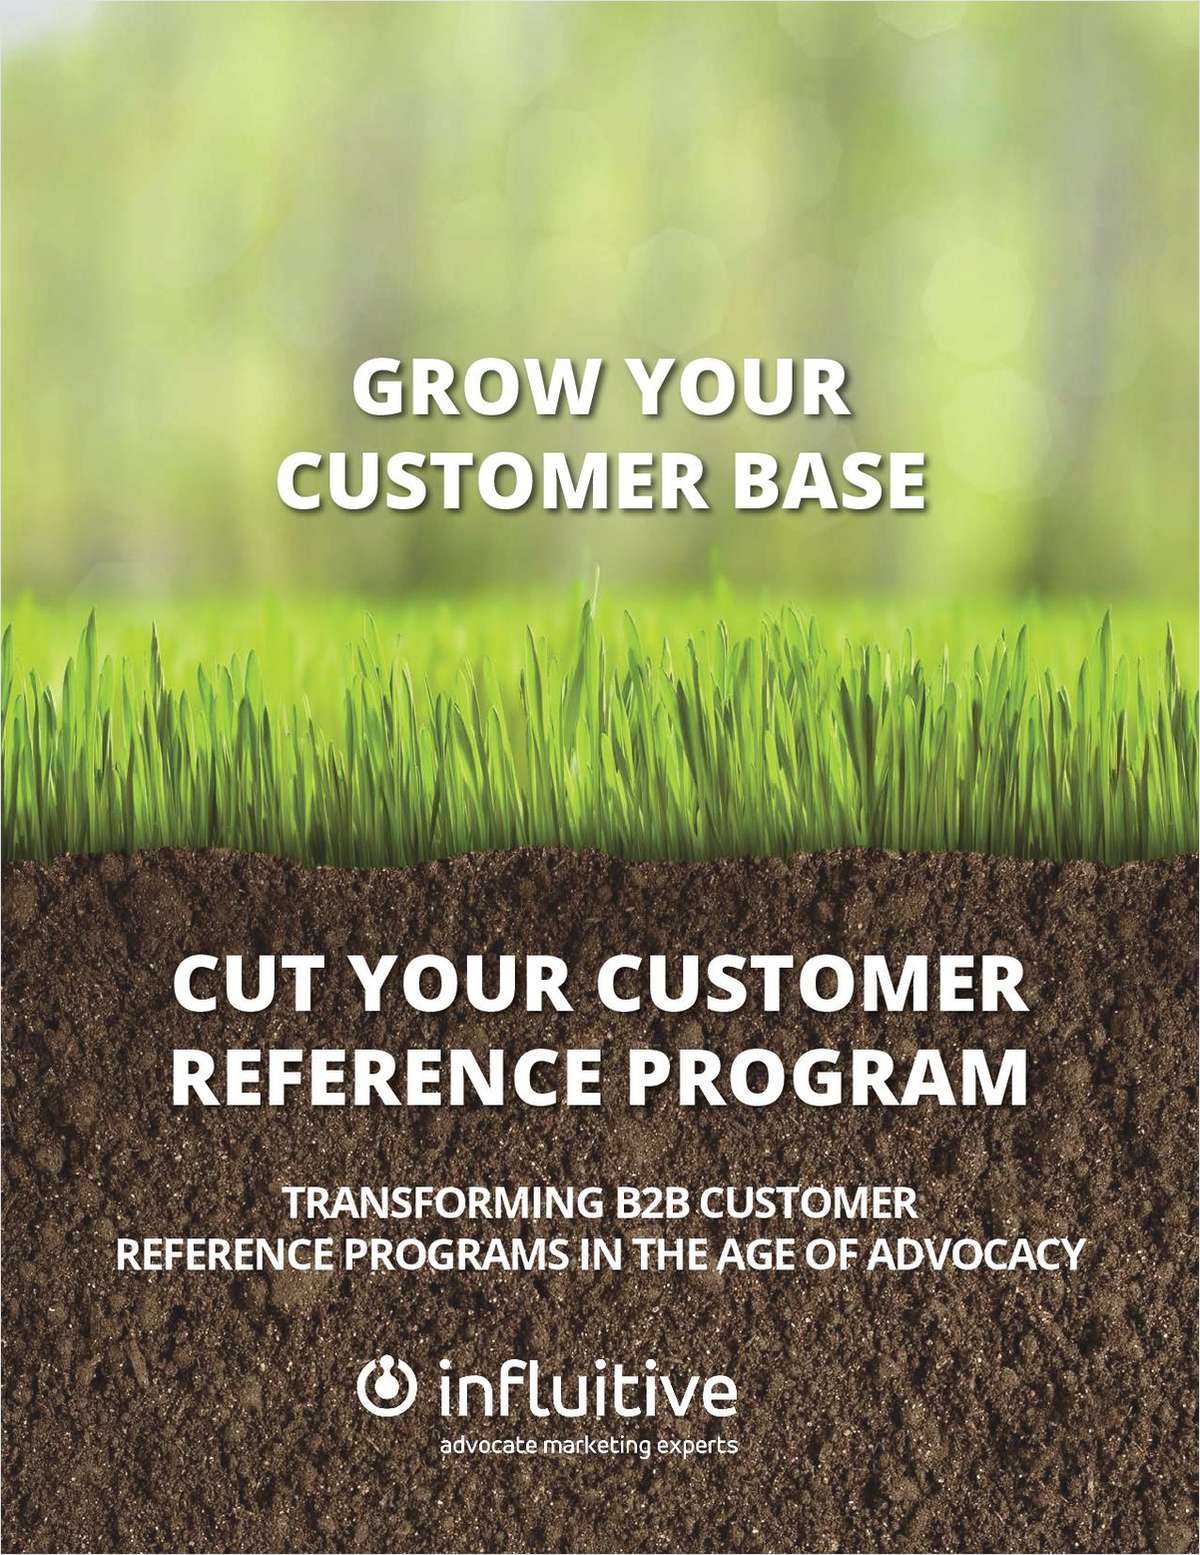 Grow Your Customer Base: Cut Your Customer Reference Program